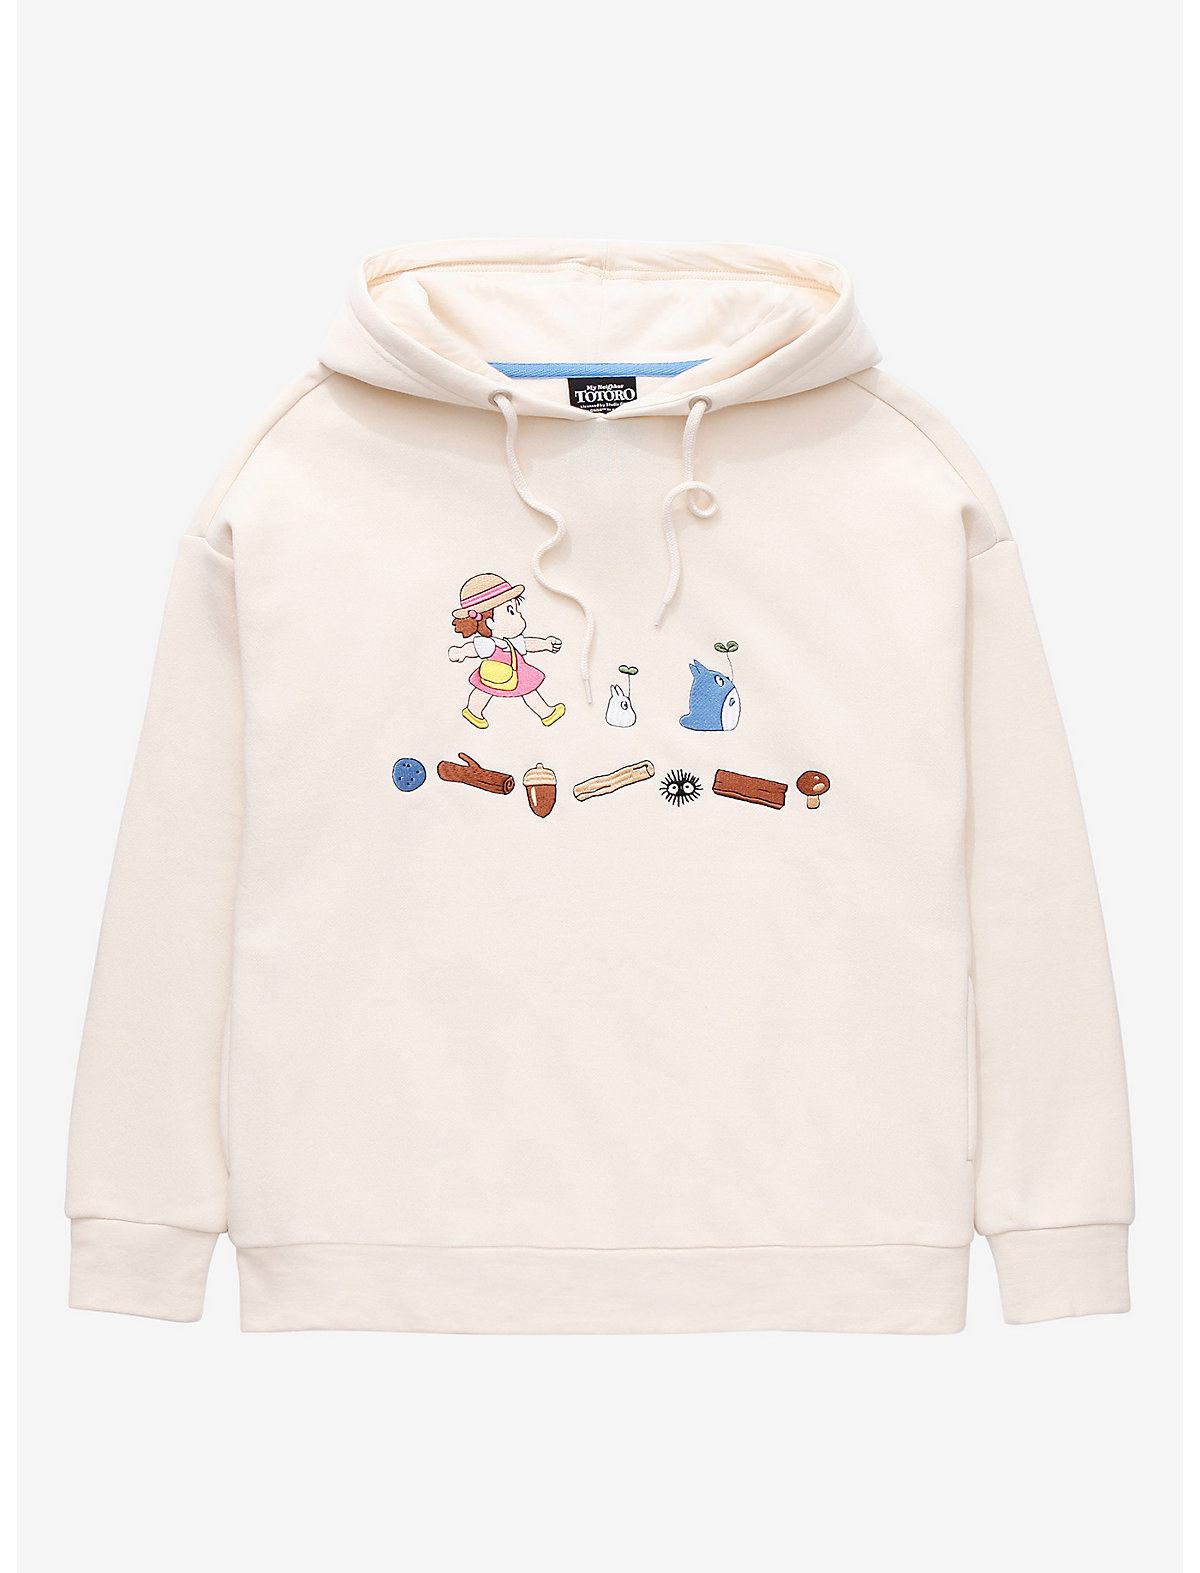 a cream colored hoodie with characters from my neighbor totoro on it